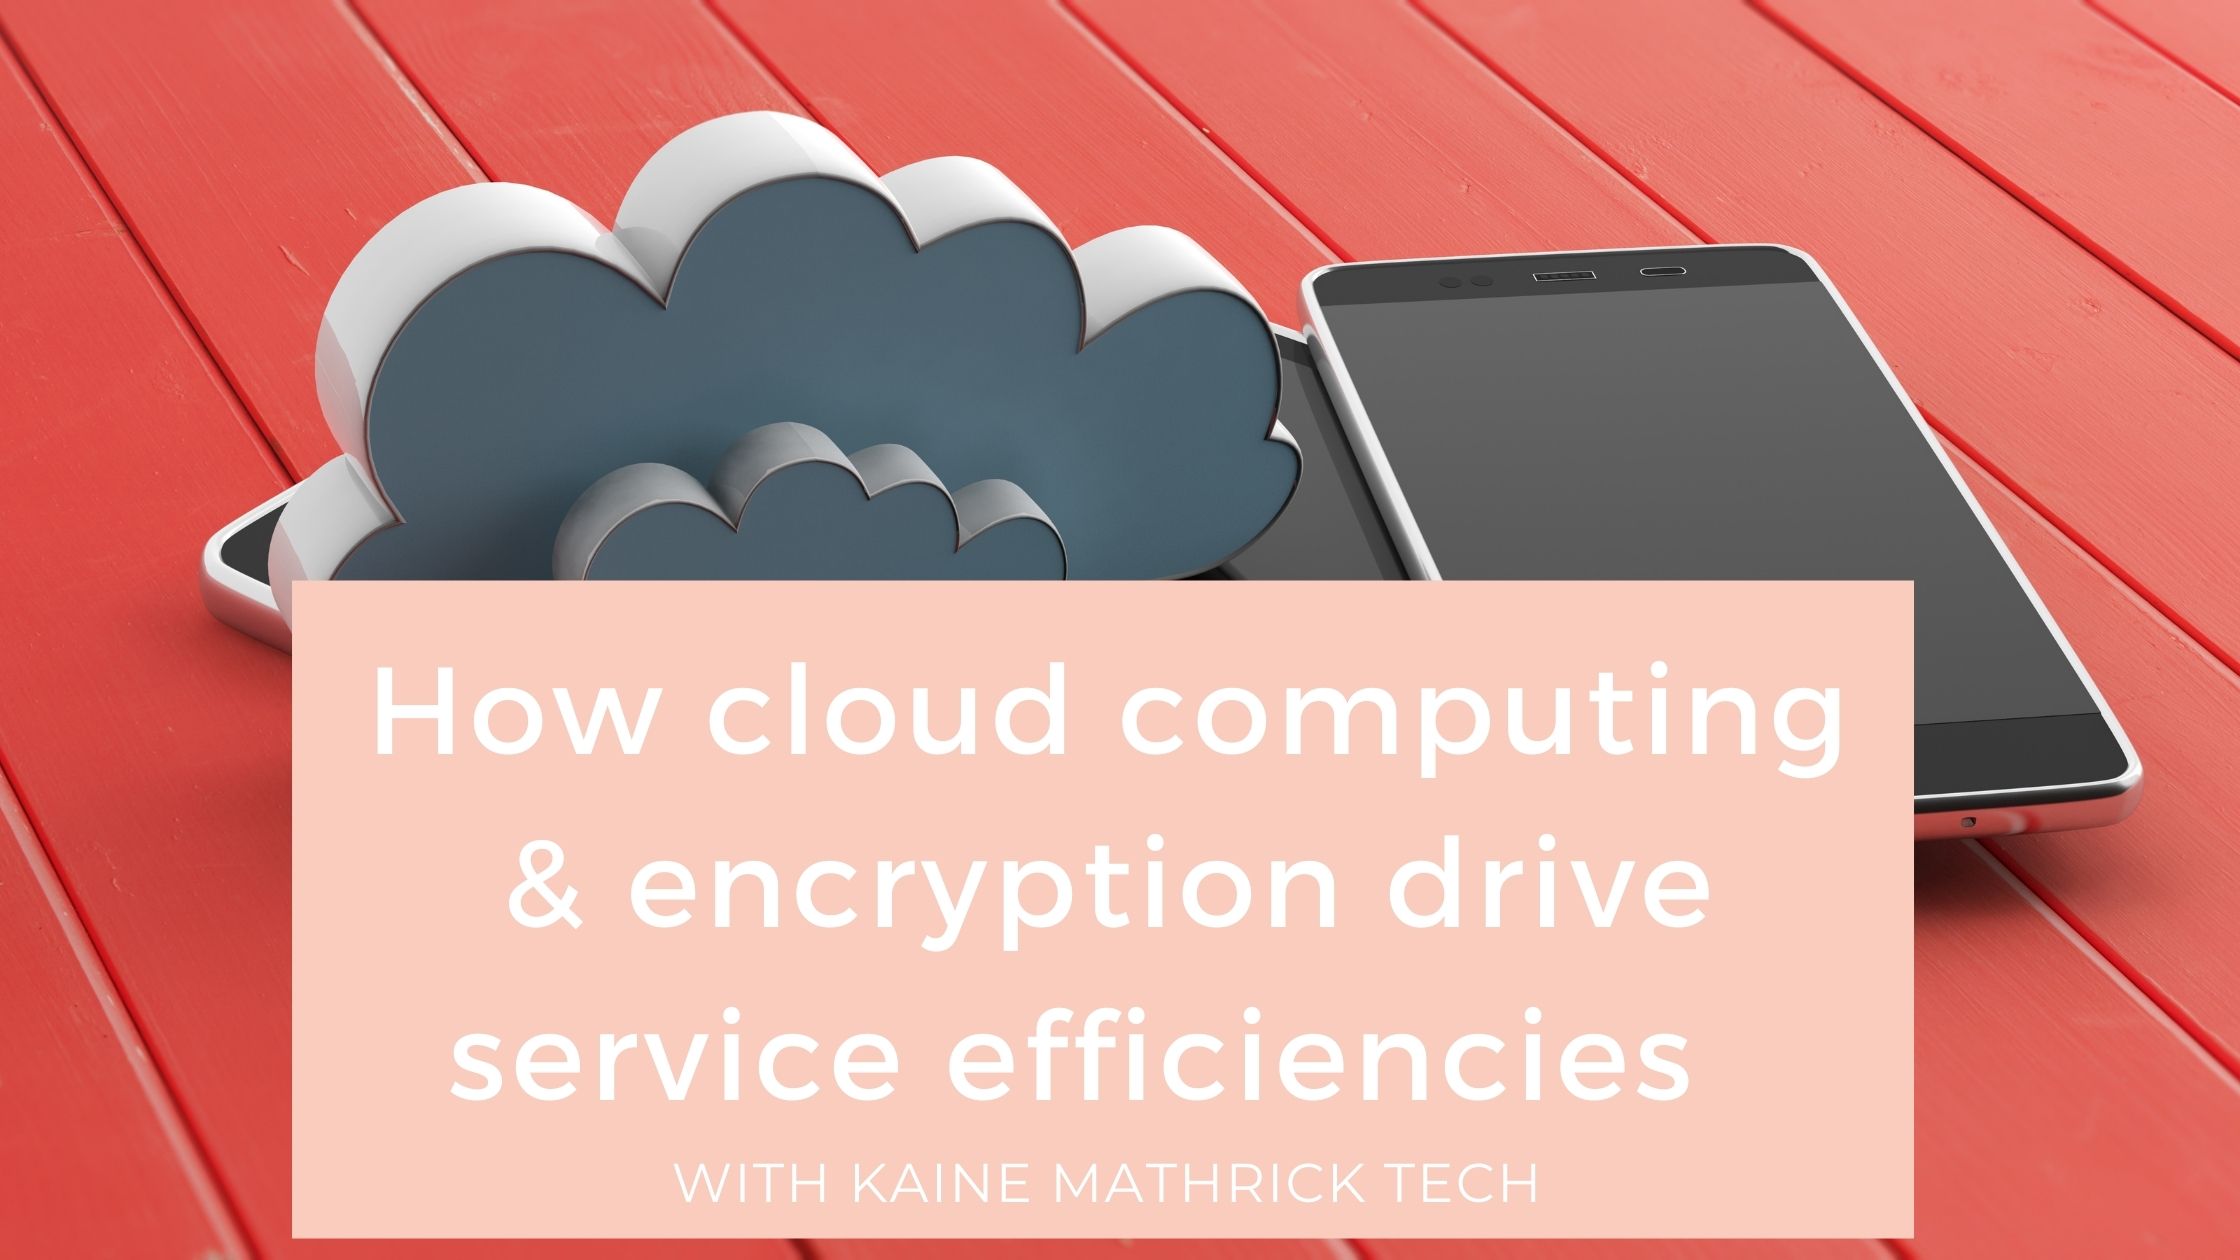 How Cloud Based Systems Ensure Efficient Service Delivery